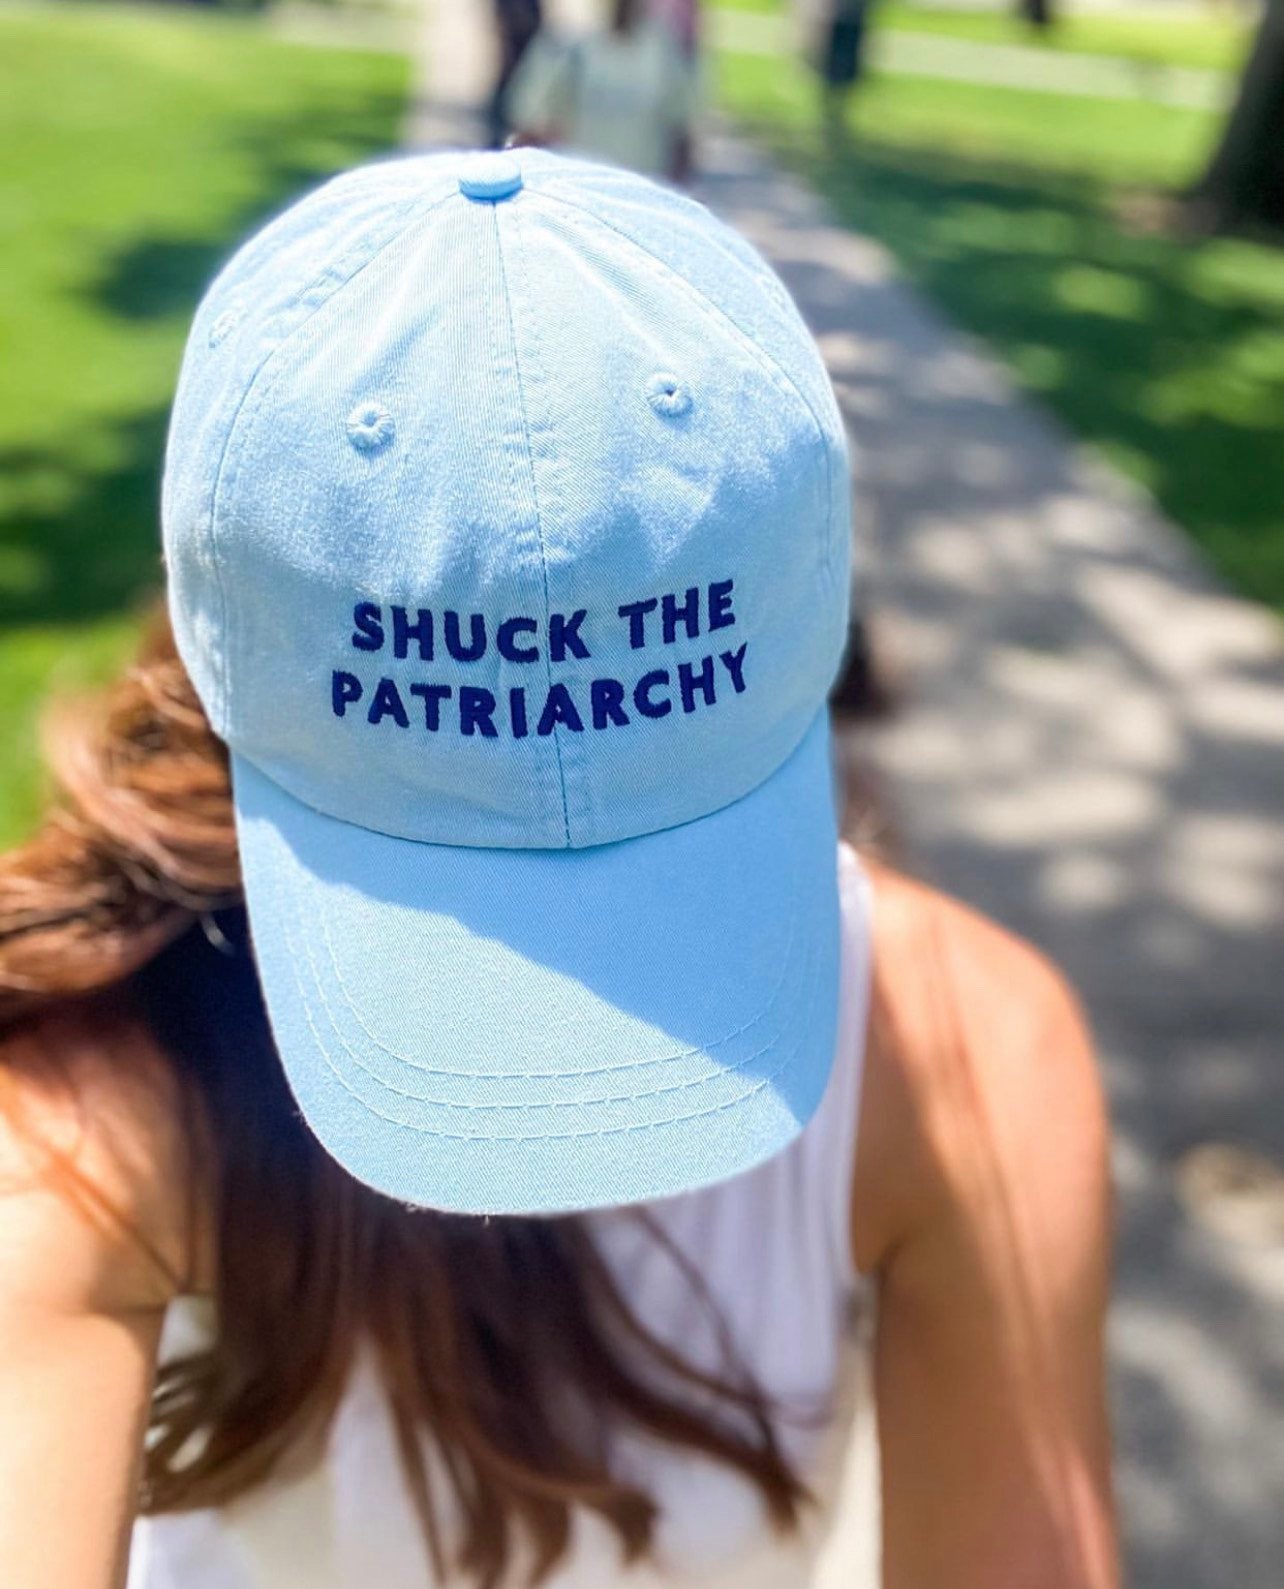 A woman wears a baseball cap that reads "Shuck the Patriarchy"